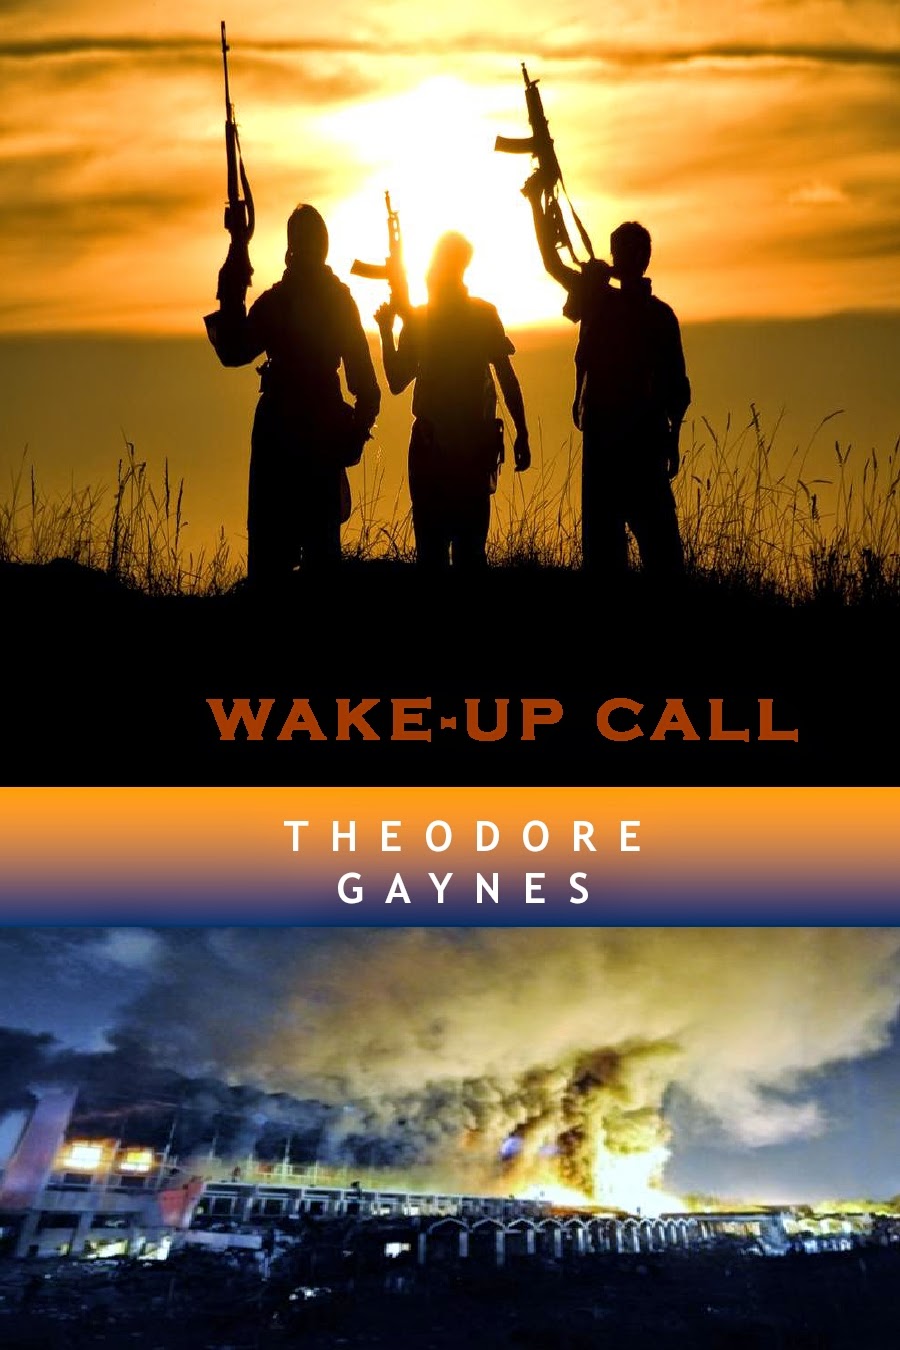 COMING SOON FROM THEODORE GAYNES